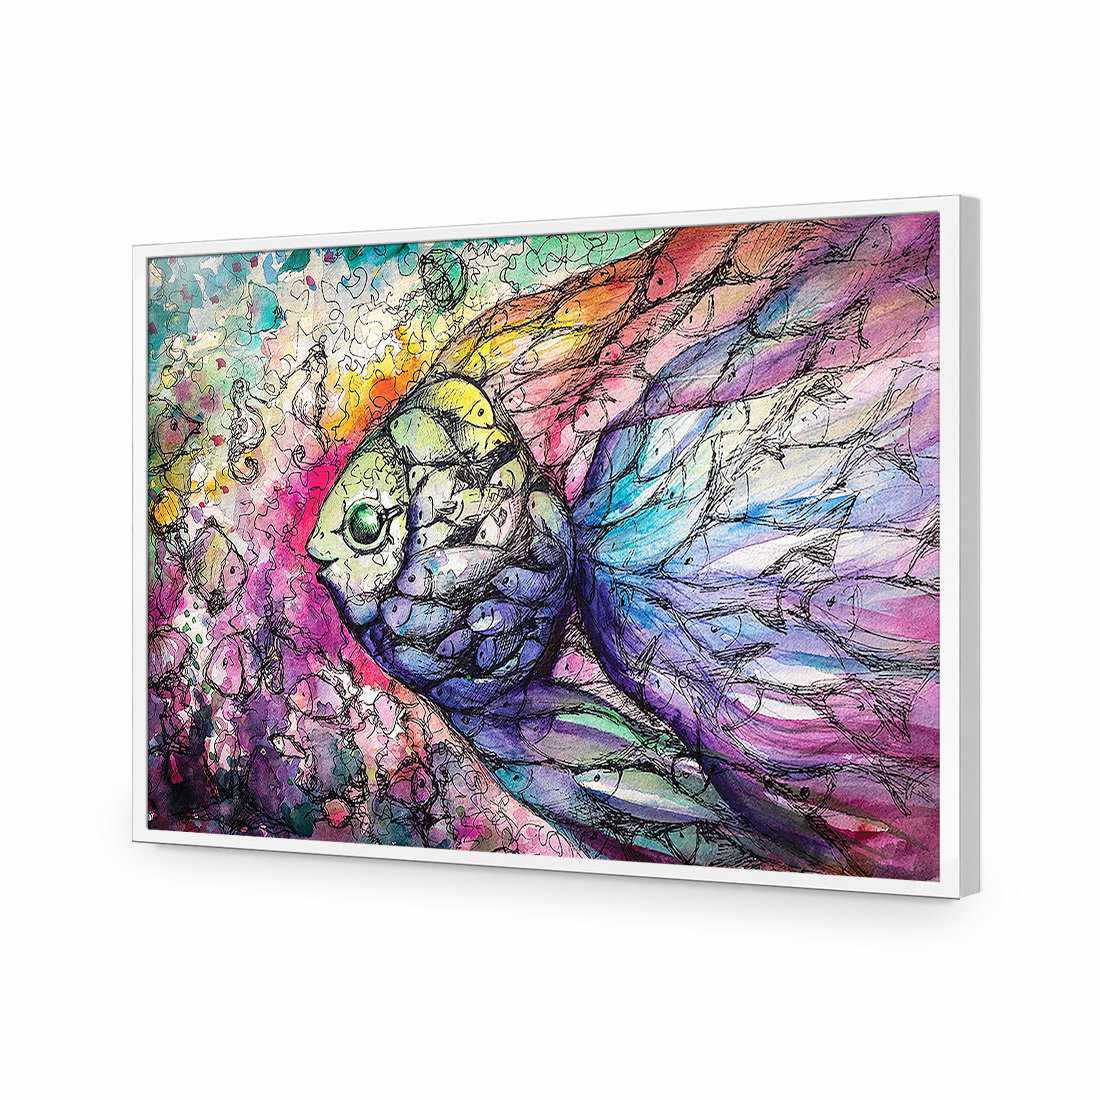 Scribblefish-Acrylic-Wall Art Design-Without Border-Acrylic - White Frame-45x30cm-Wall Art Designs